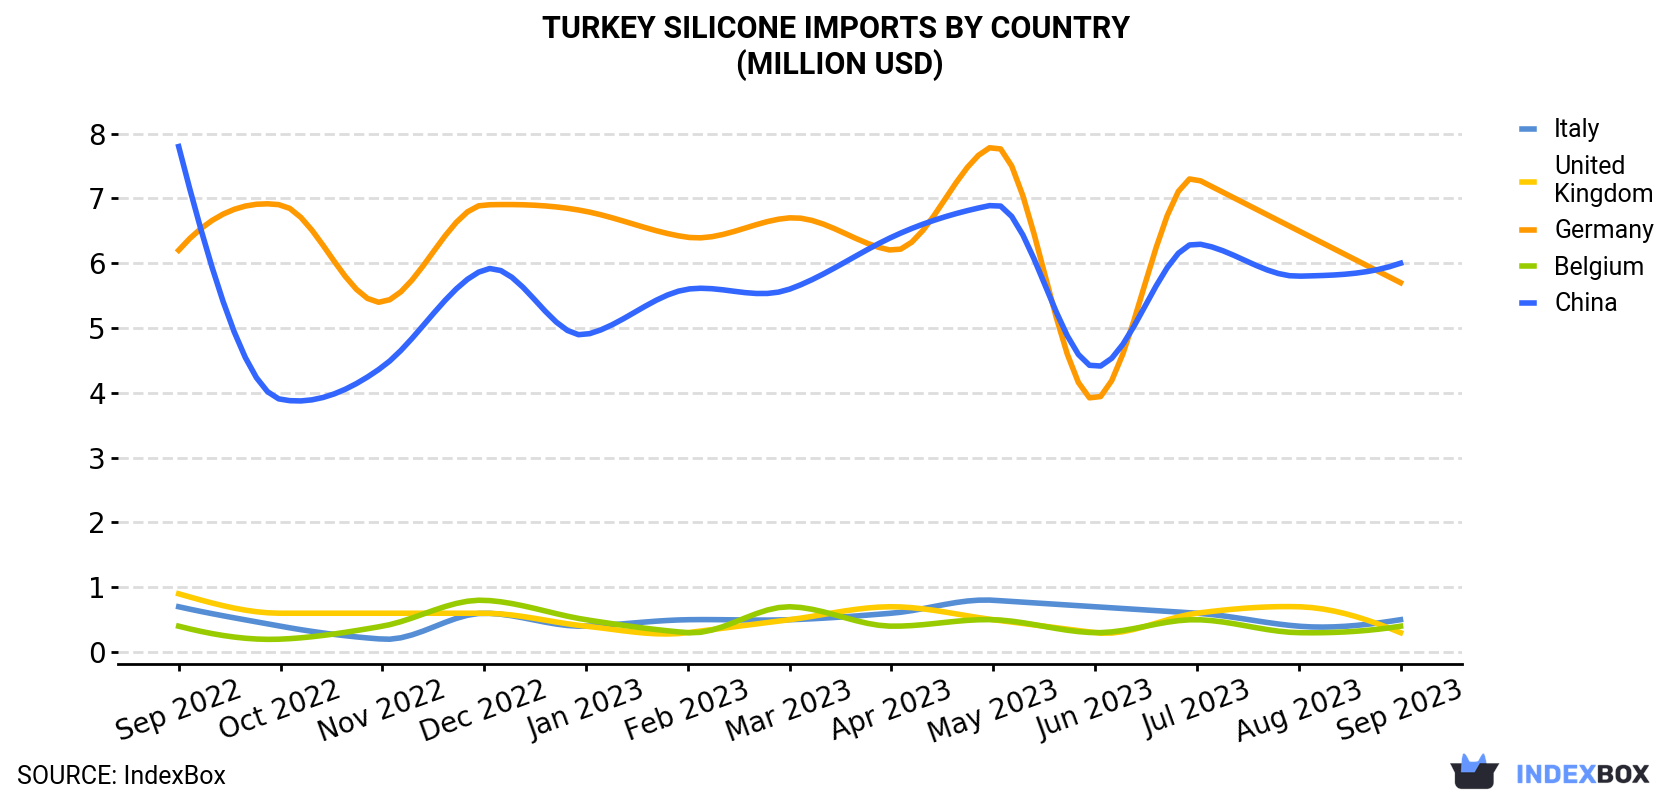 Turkey Silicone Imports By Country (Million USD)